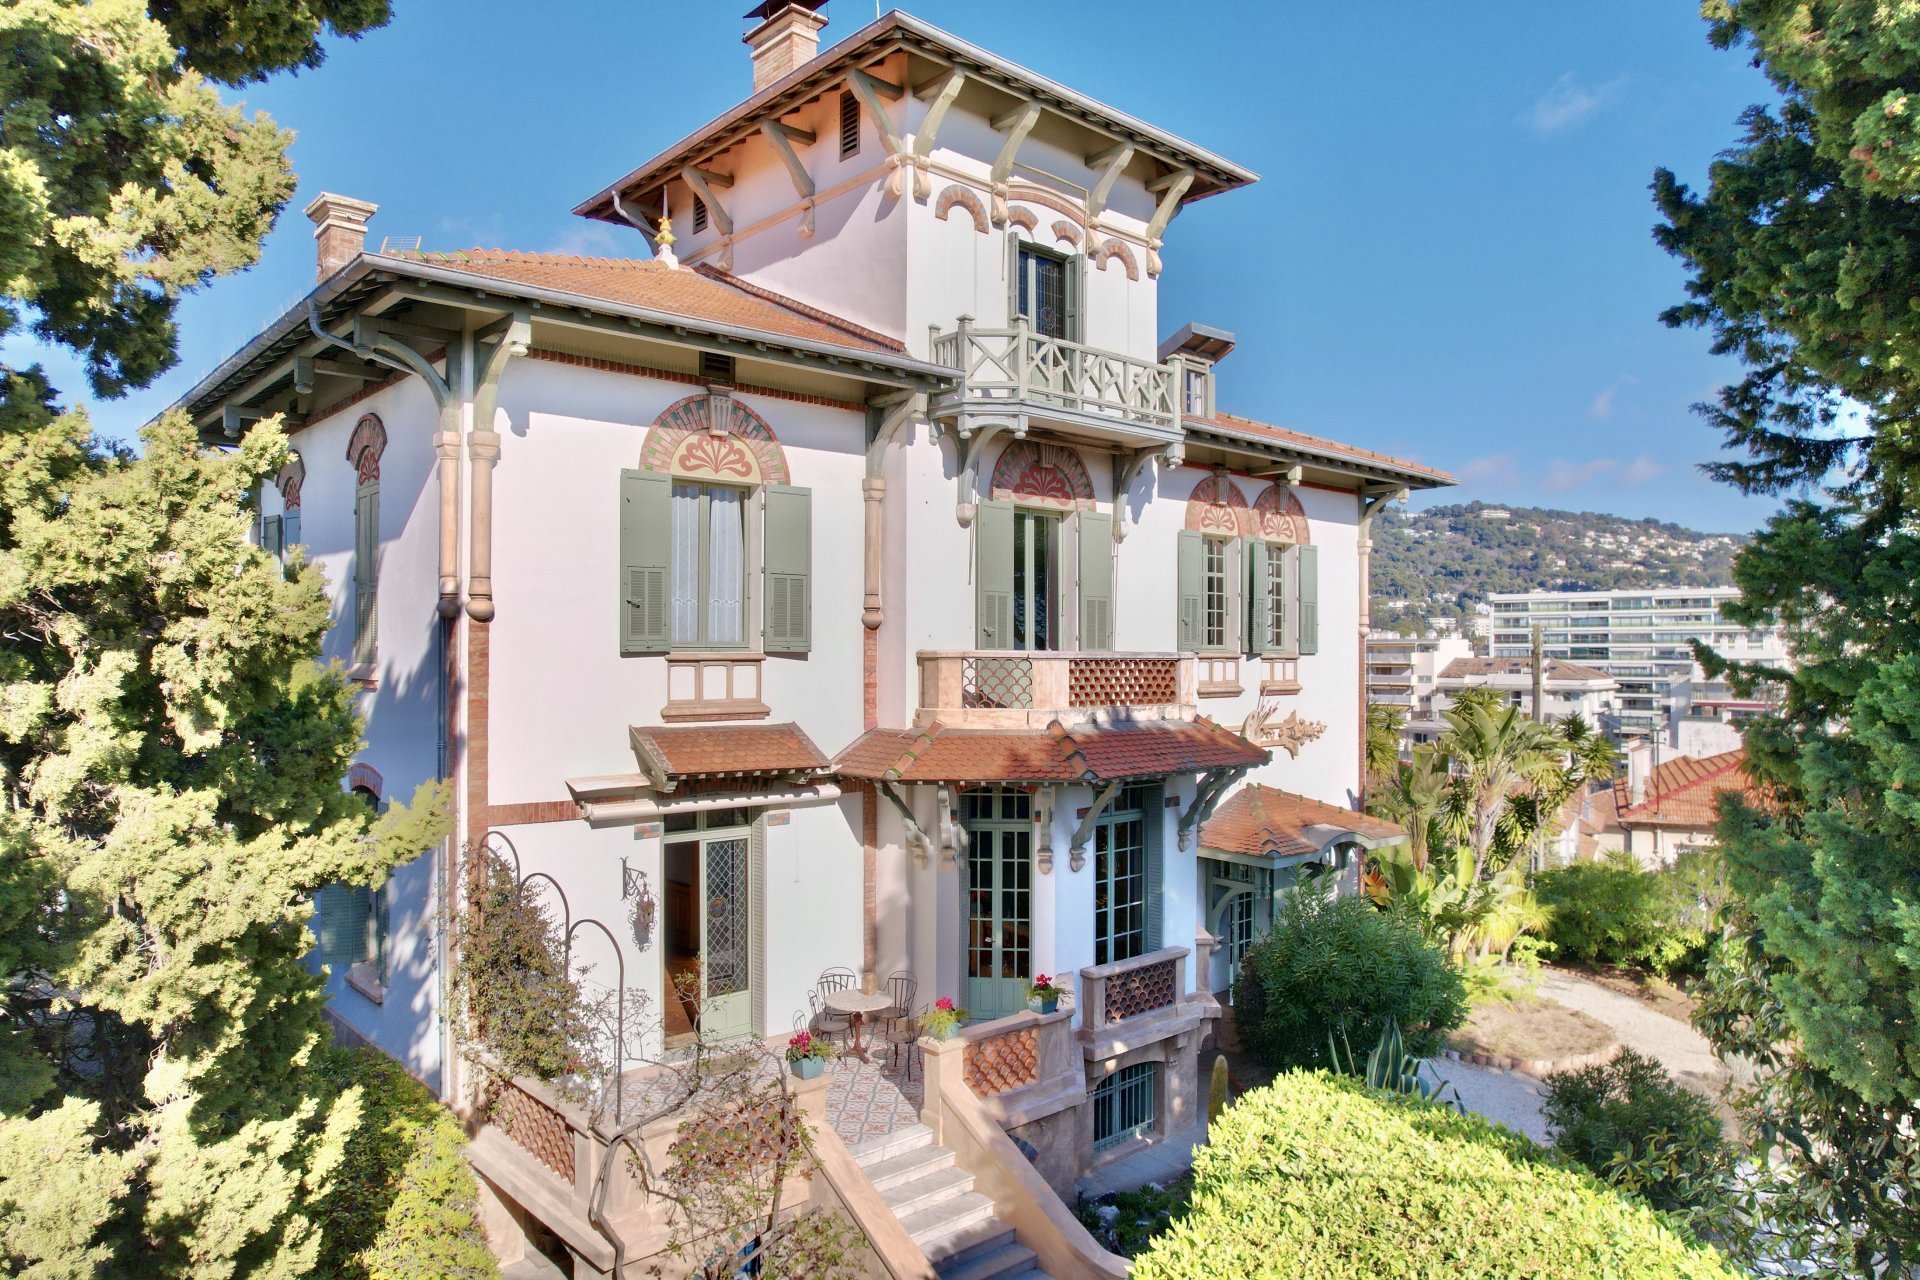 6 Bedroom House For Sale in Cannes